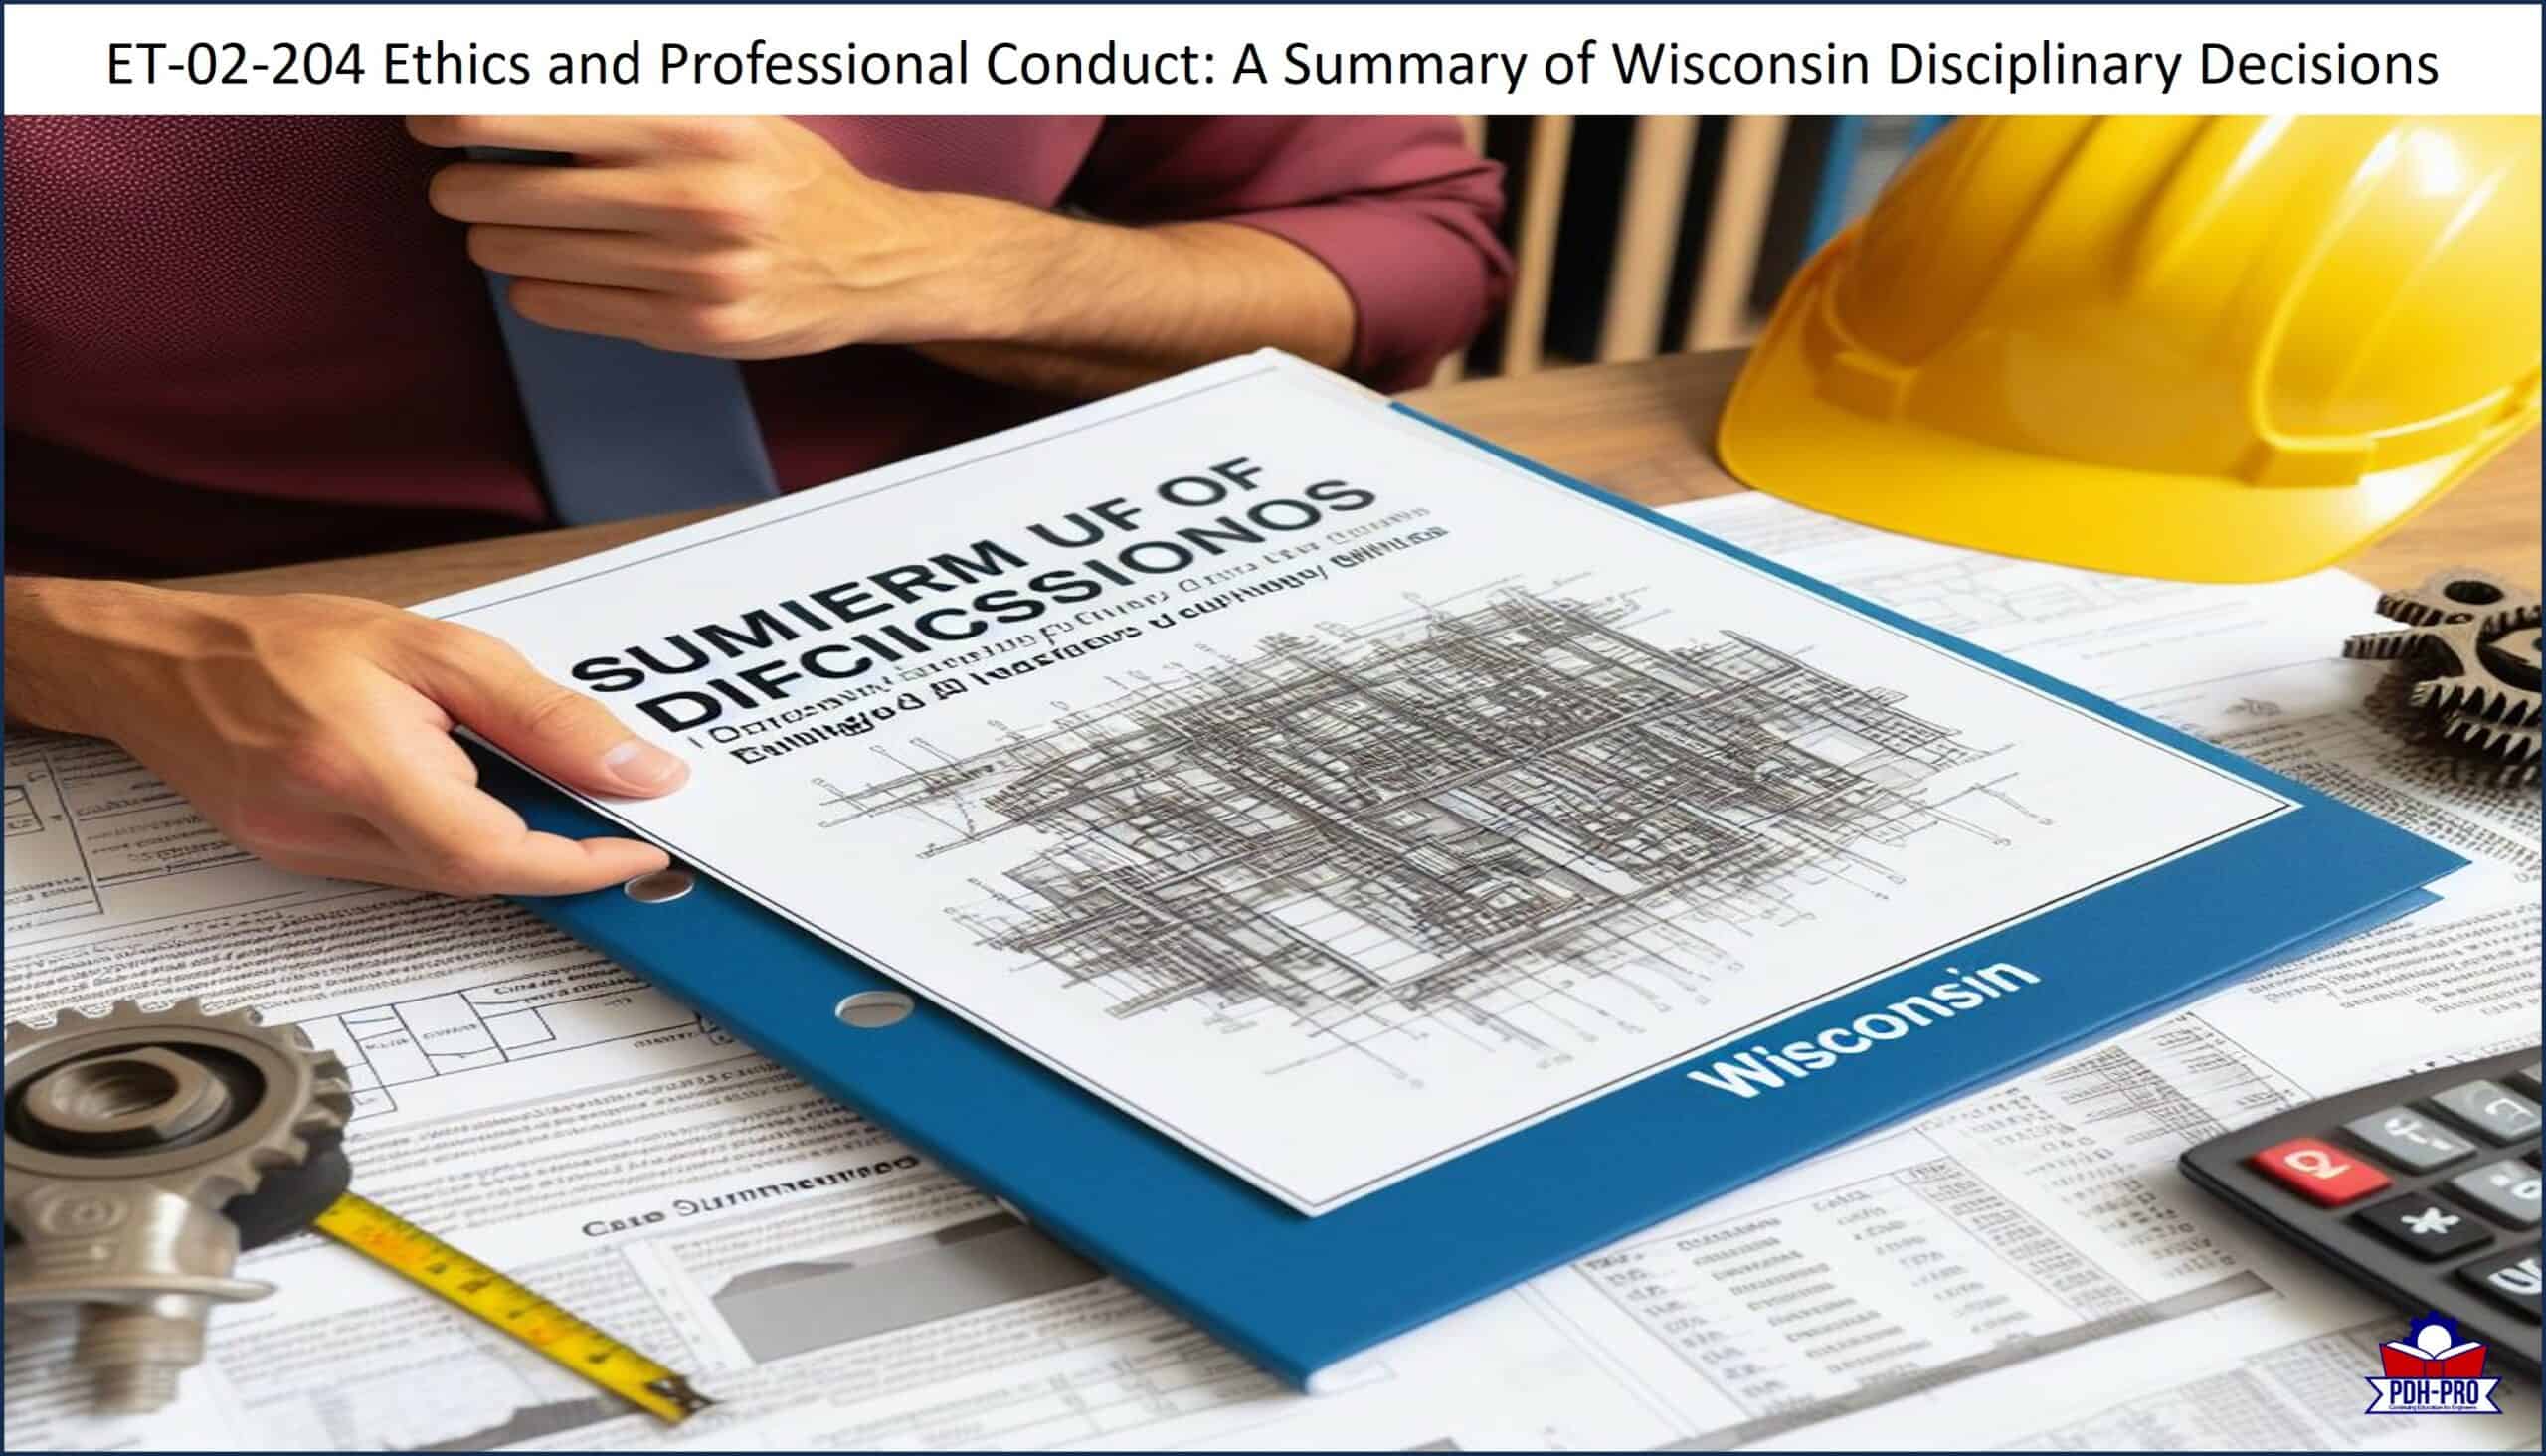 Ethics and Professional Conduct: A Summary of Wisconsin Disciplinary Decisions